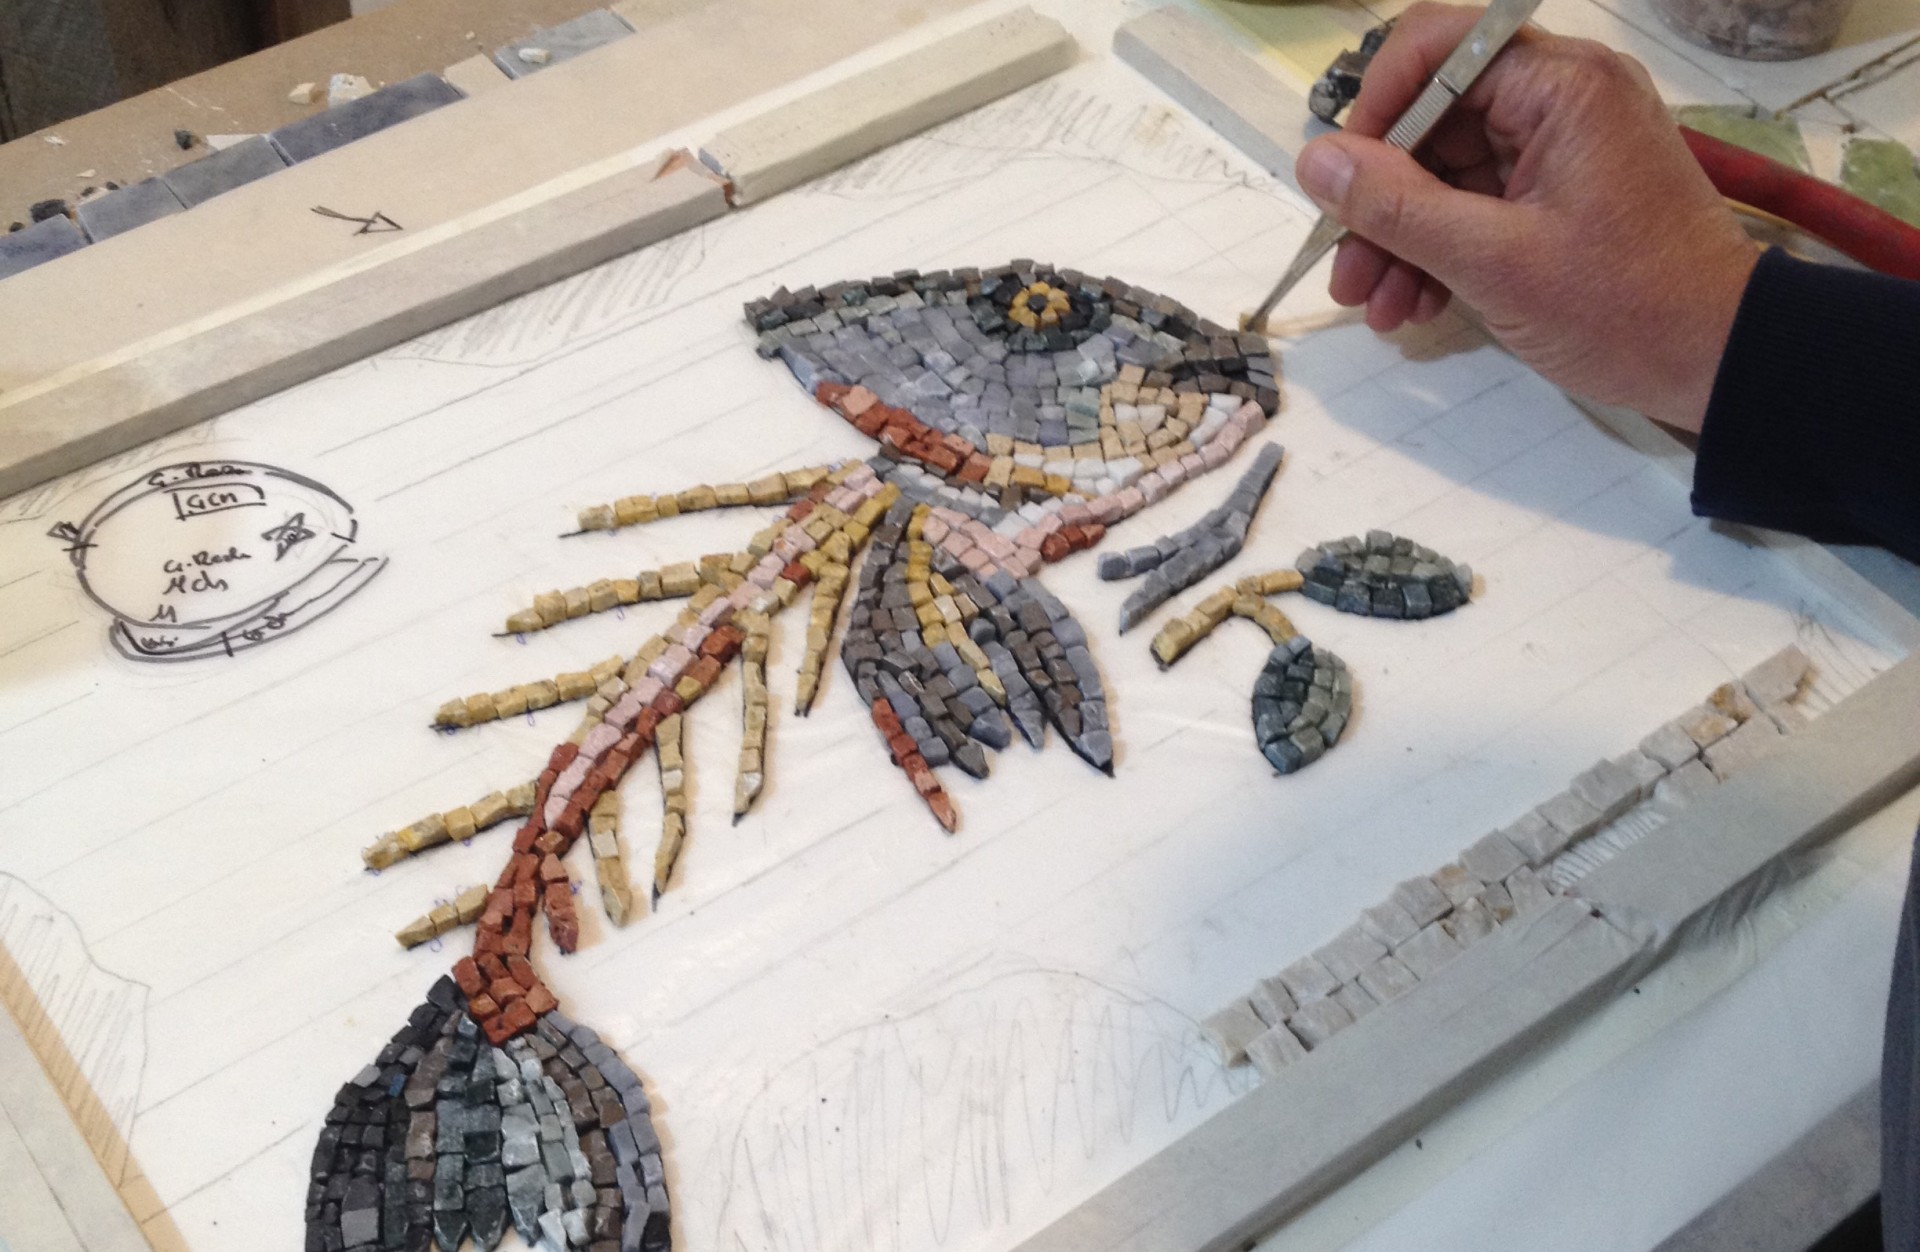 Mosaic Art: one day in a lab!